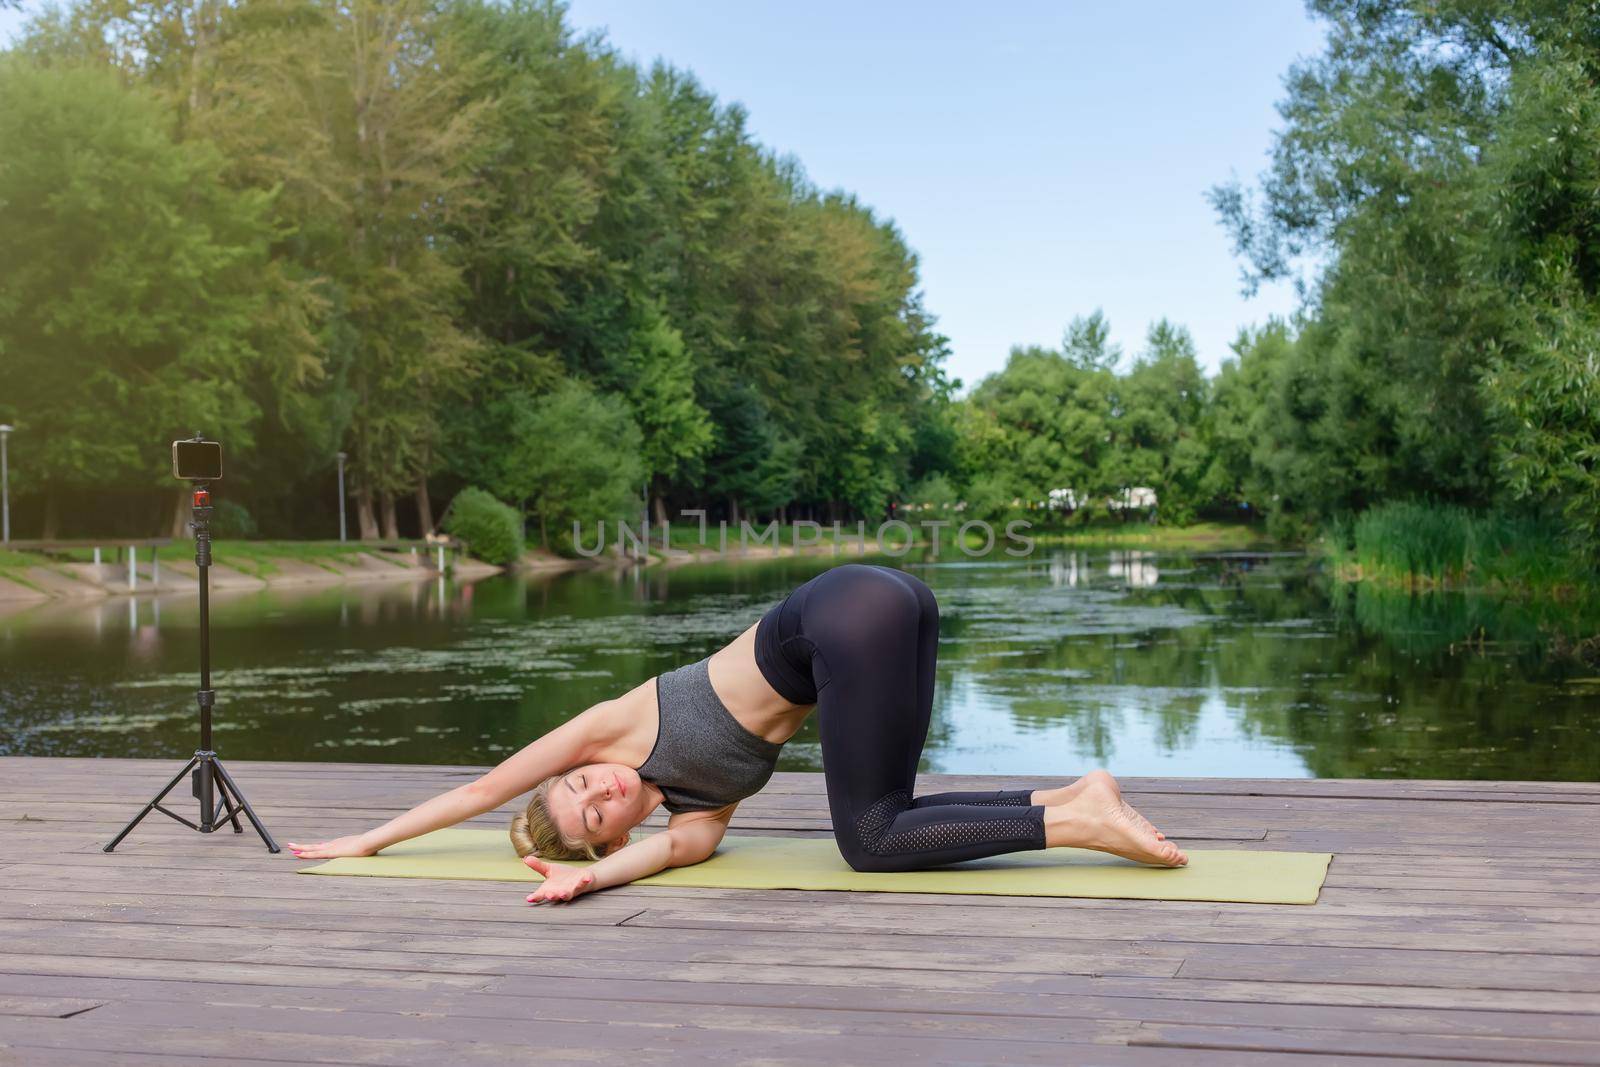 A slender woman in a gray top and leggings, on a wooden platform by a pond in the park in summer, does yoga, performs twisting exercises, on a green sports mat, next to her smartphone on a tripod.